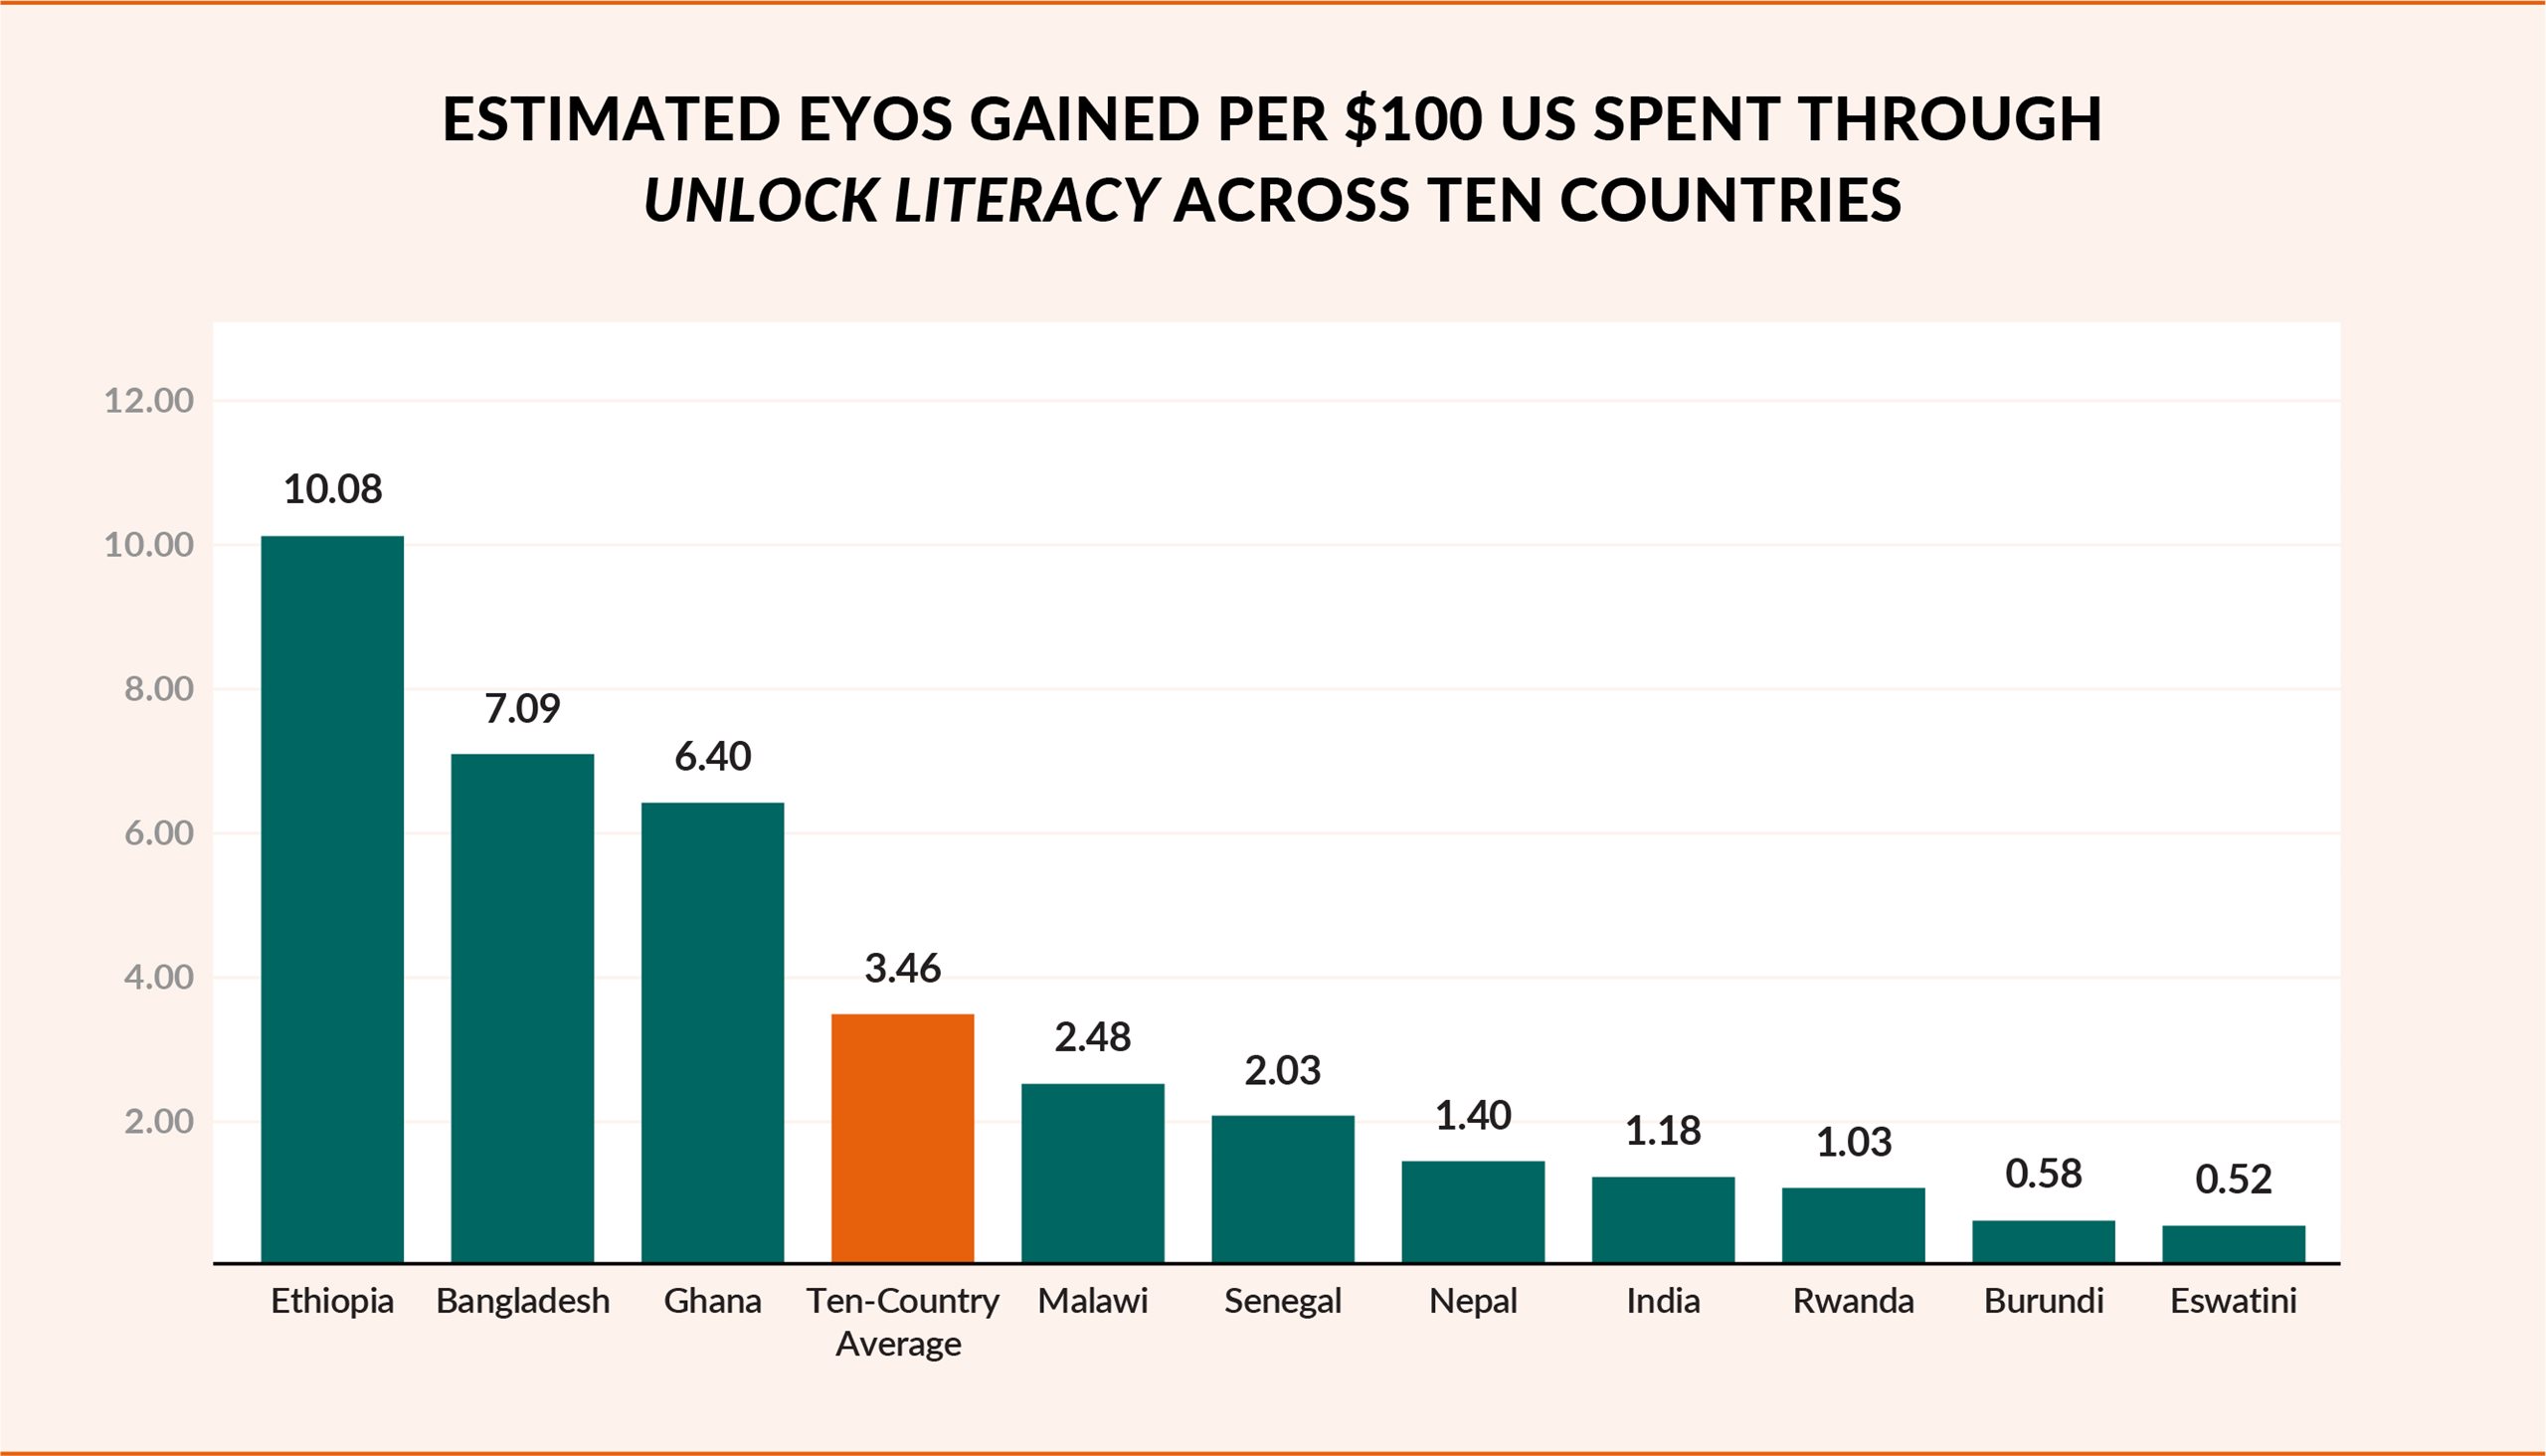 Graph shows estimated equivalent years of schooling gained per US$100 spent through Unlock Literacy across 10 countries.